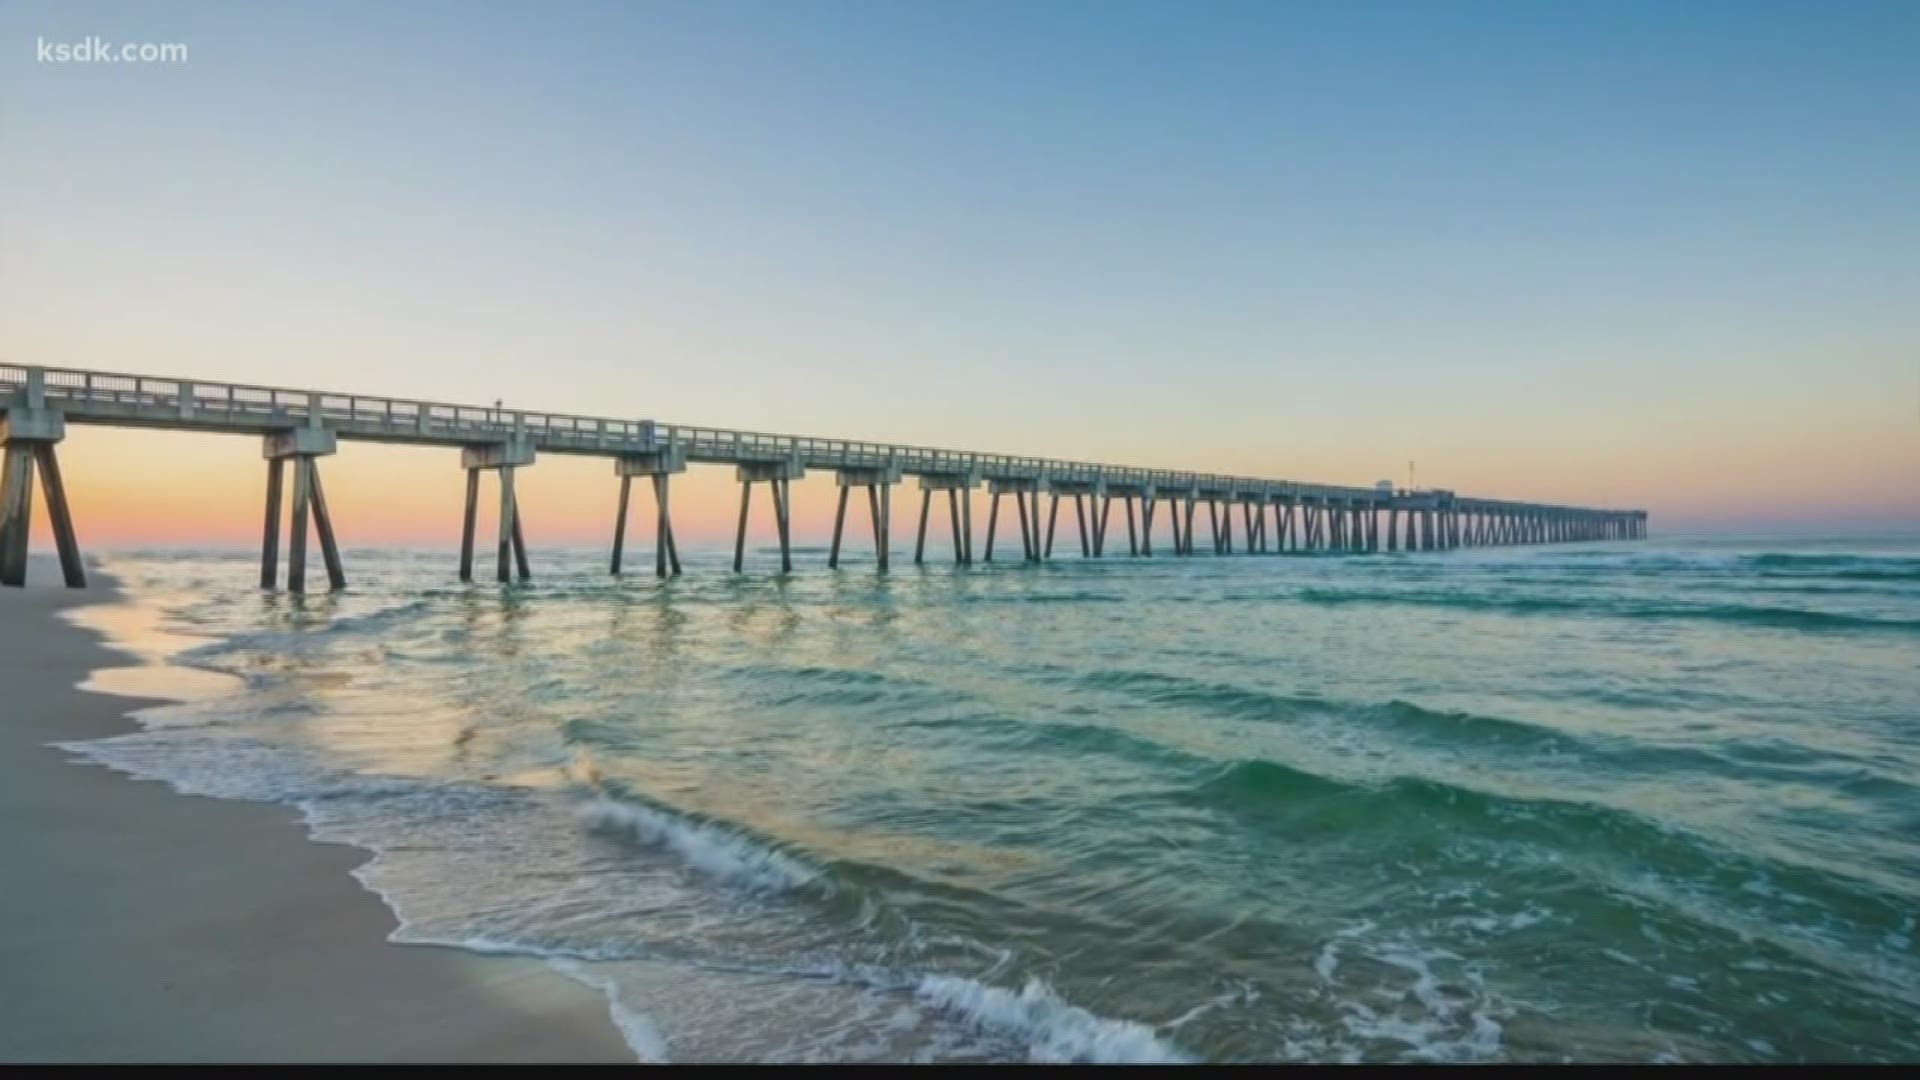 Vrbo is giving away a $5,000 family getaway to Panama City Beach.